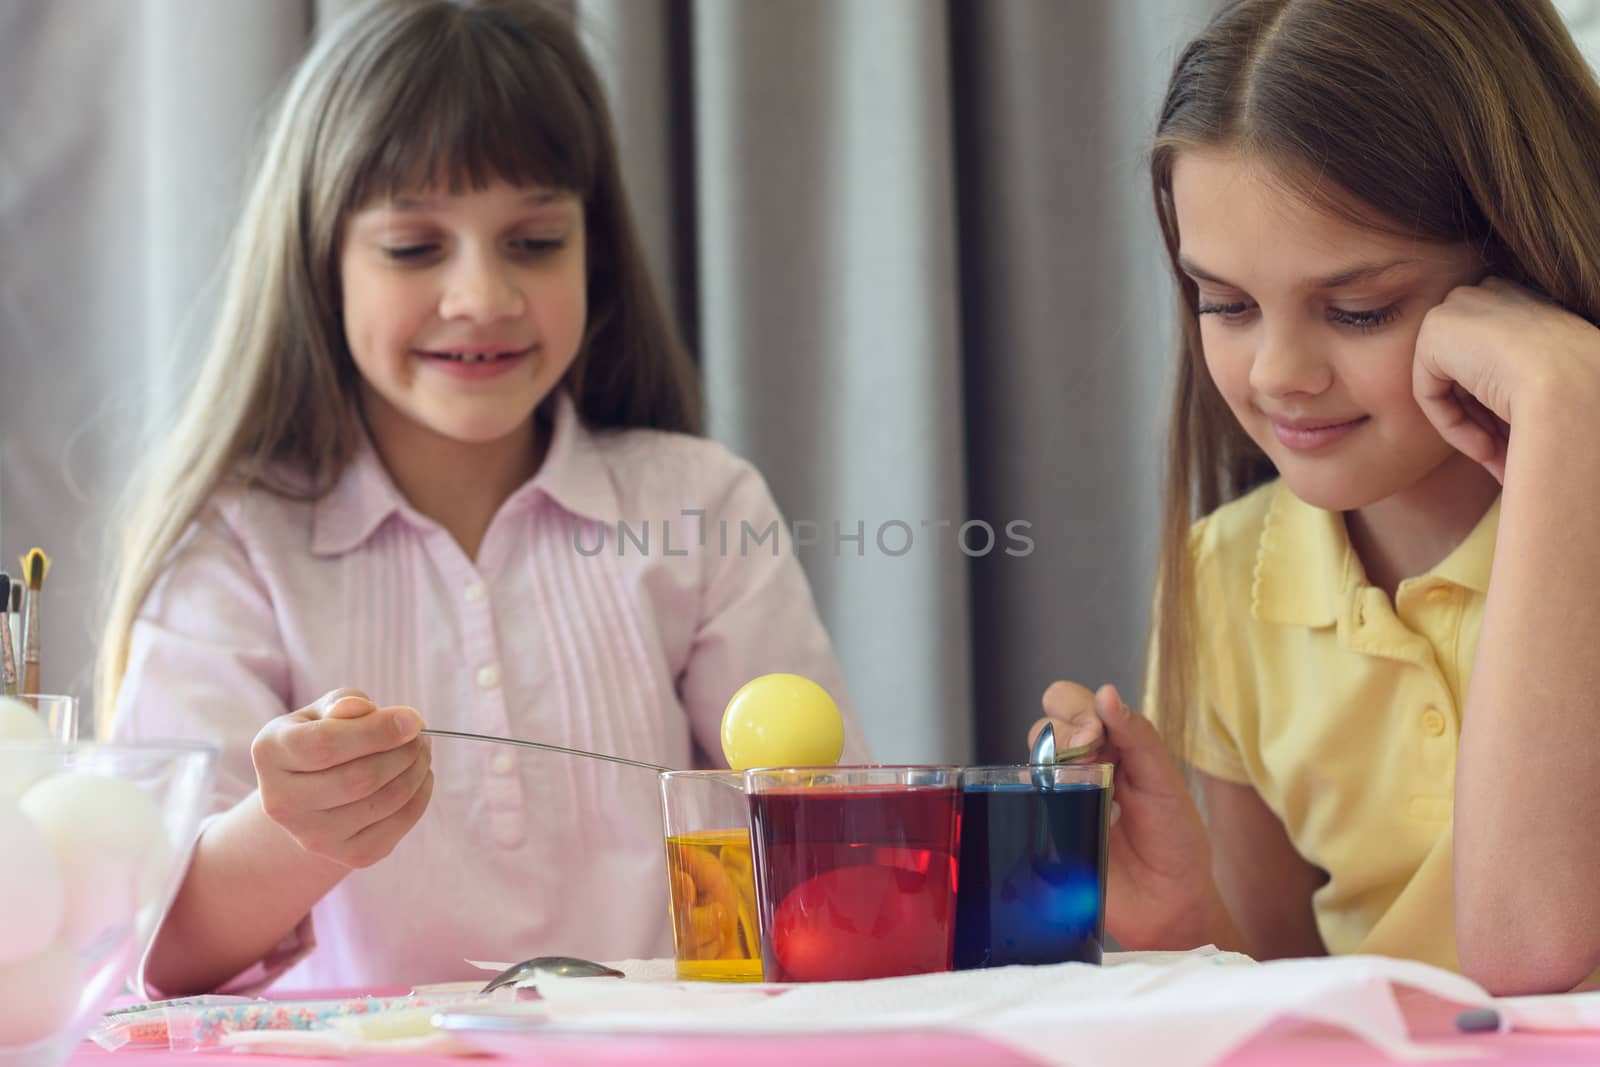 Children paint Easter eggs in glasses with liquid dye